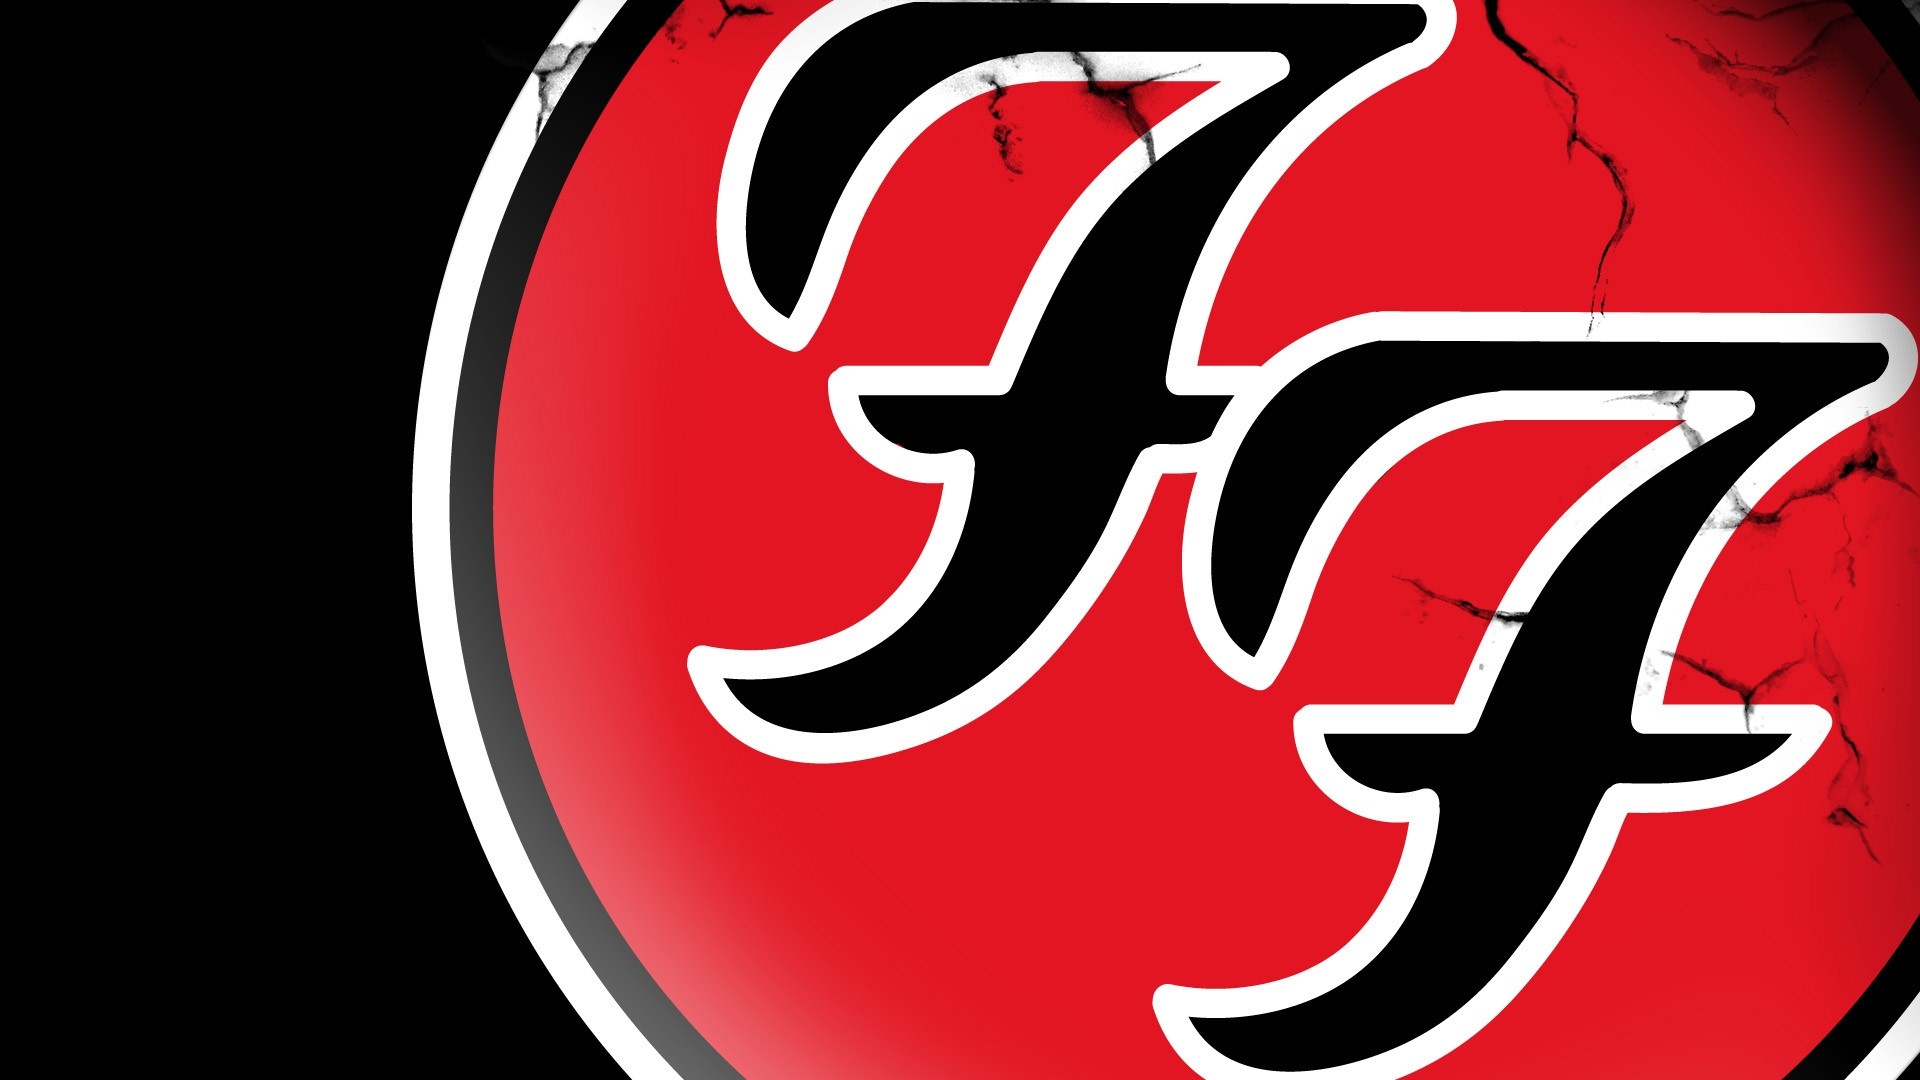 Foo fighters hd wallpapers backgrounds